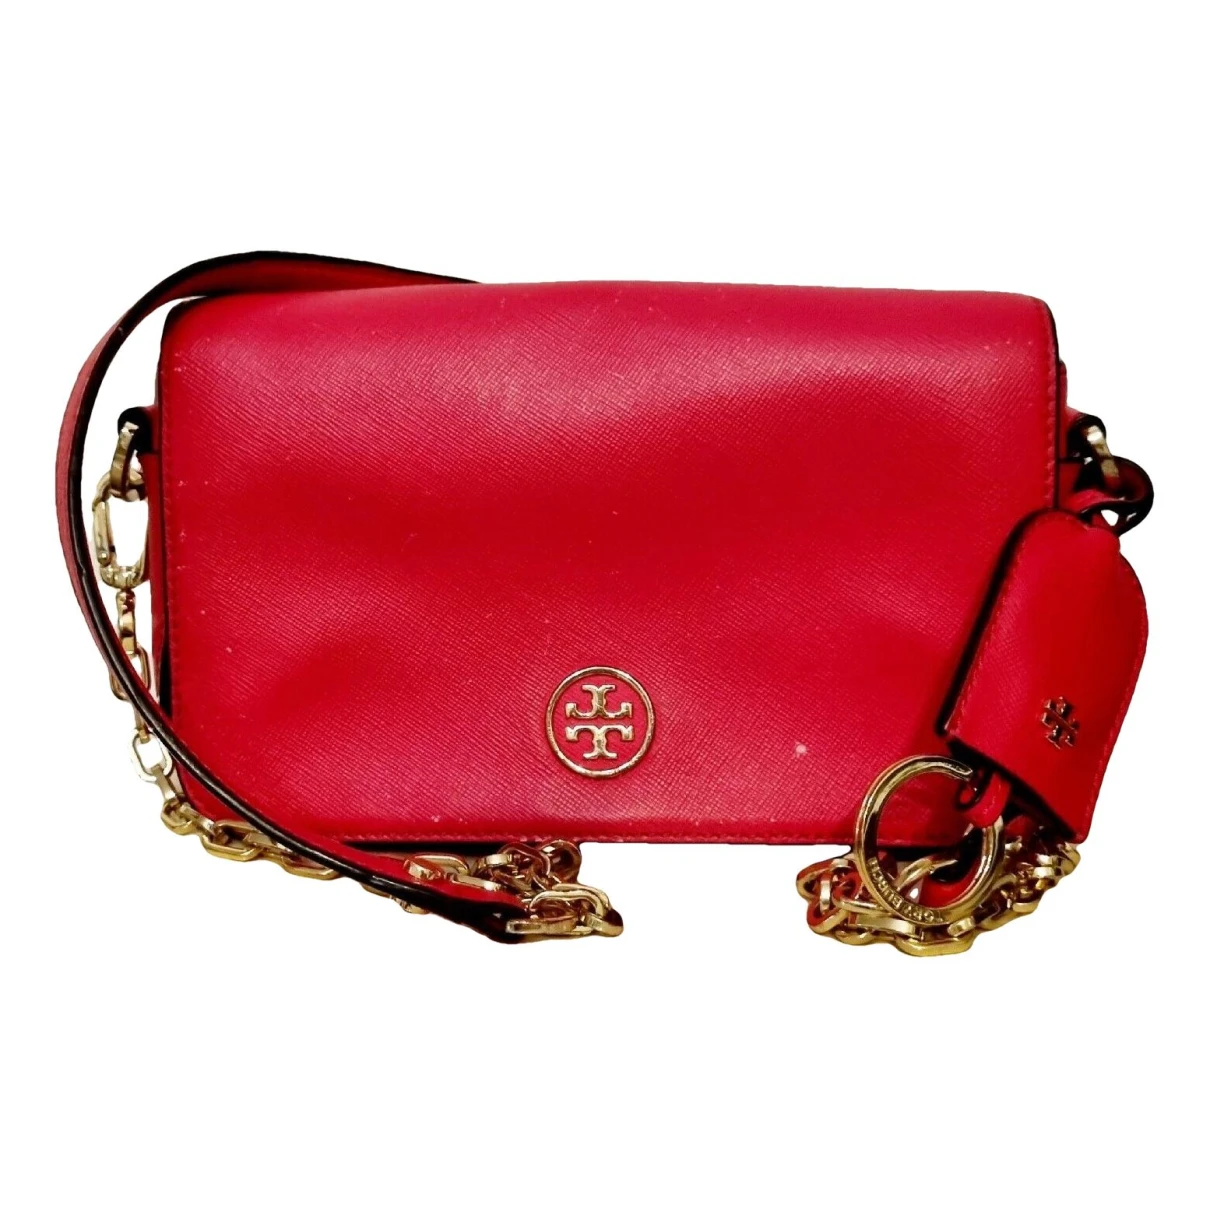 Pre-owned Tory Burch Vegan Leather Crossbody Bag In Red